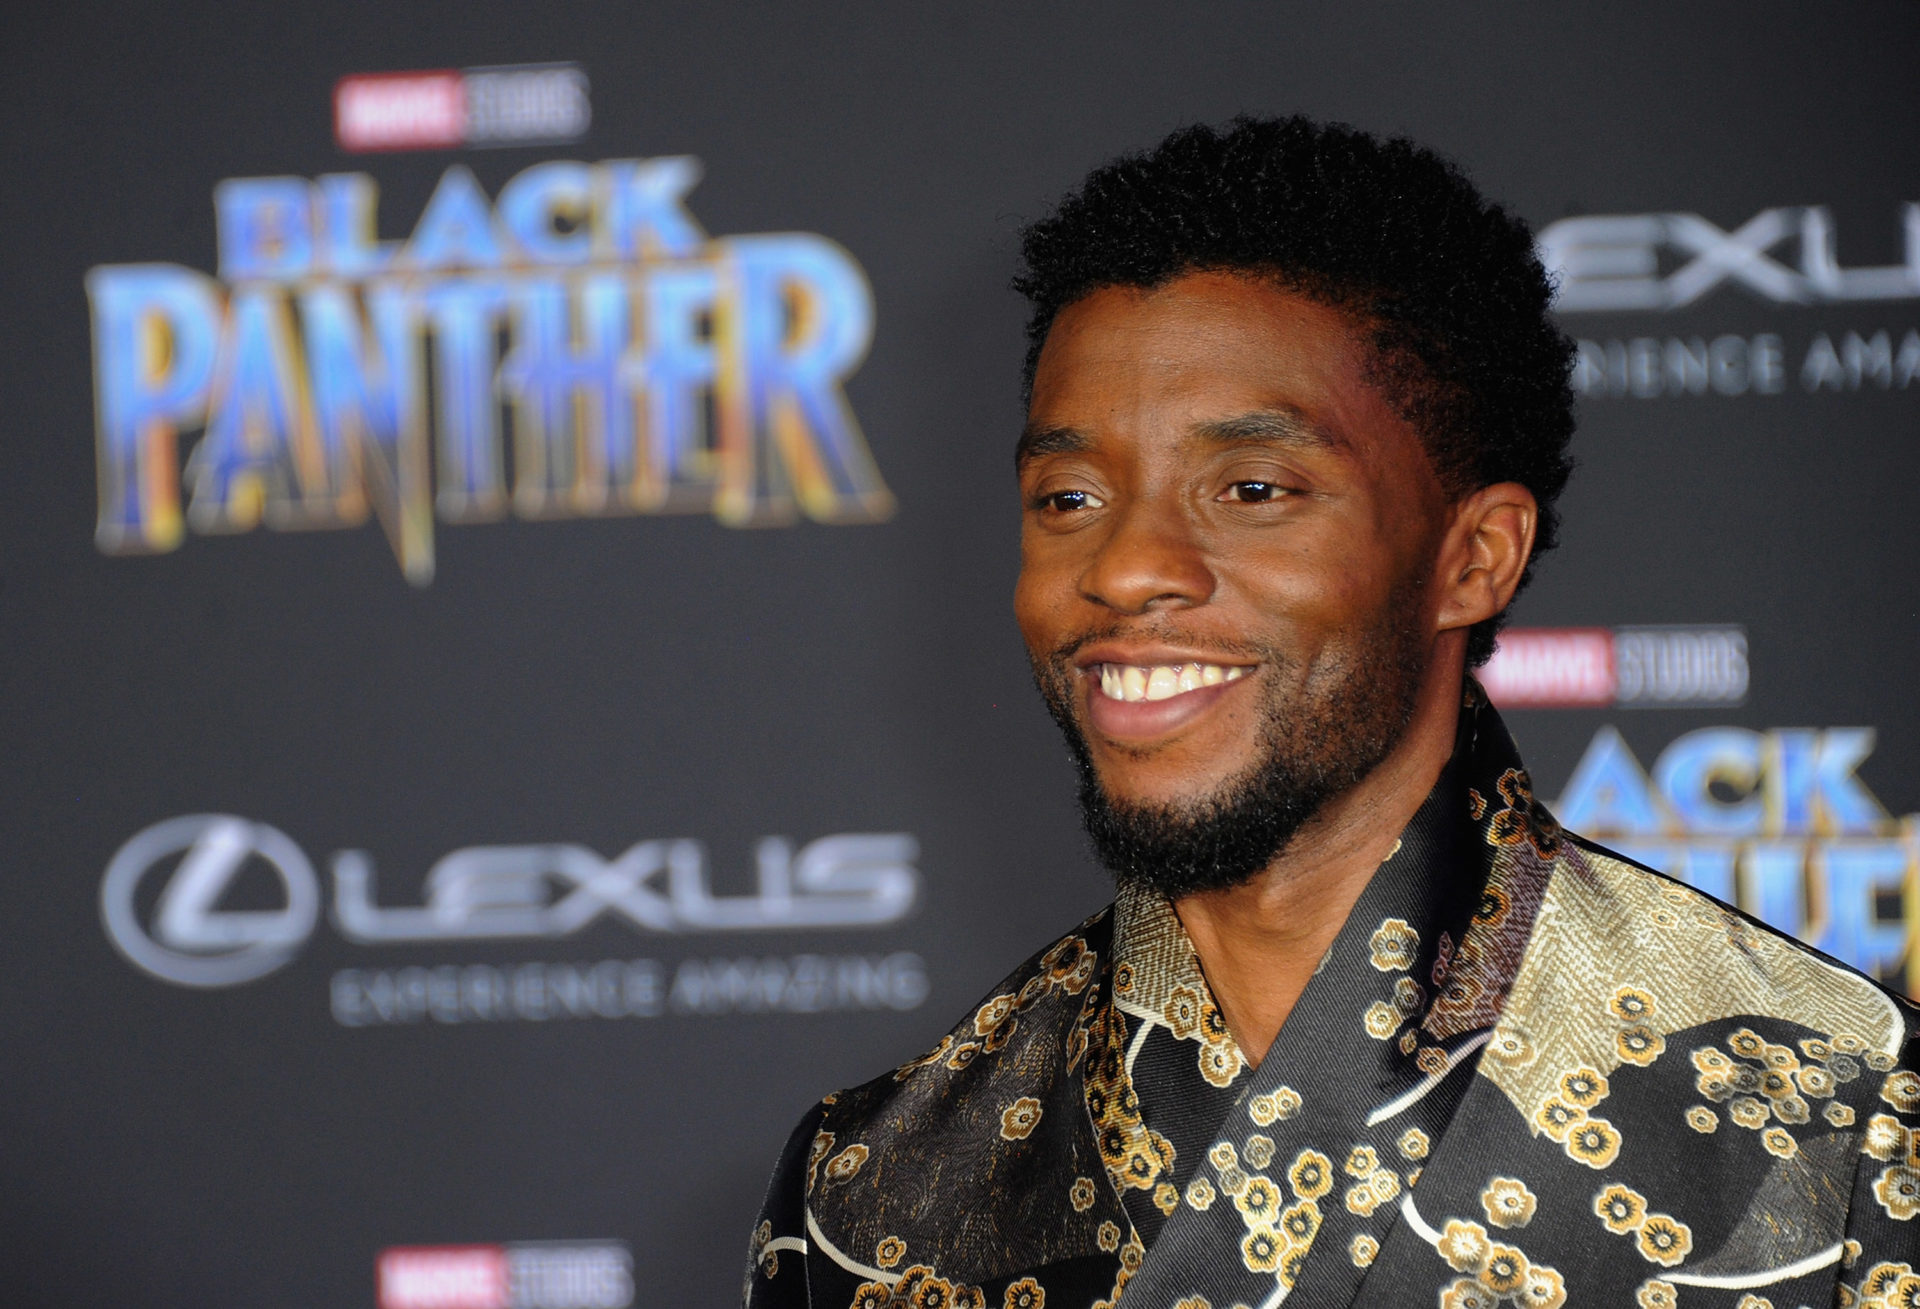 Premiere Of Disney And Marvel's "Black Panther" - Arrivals